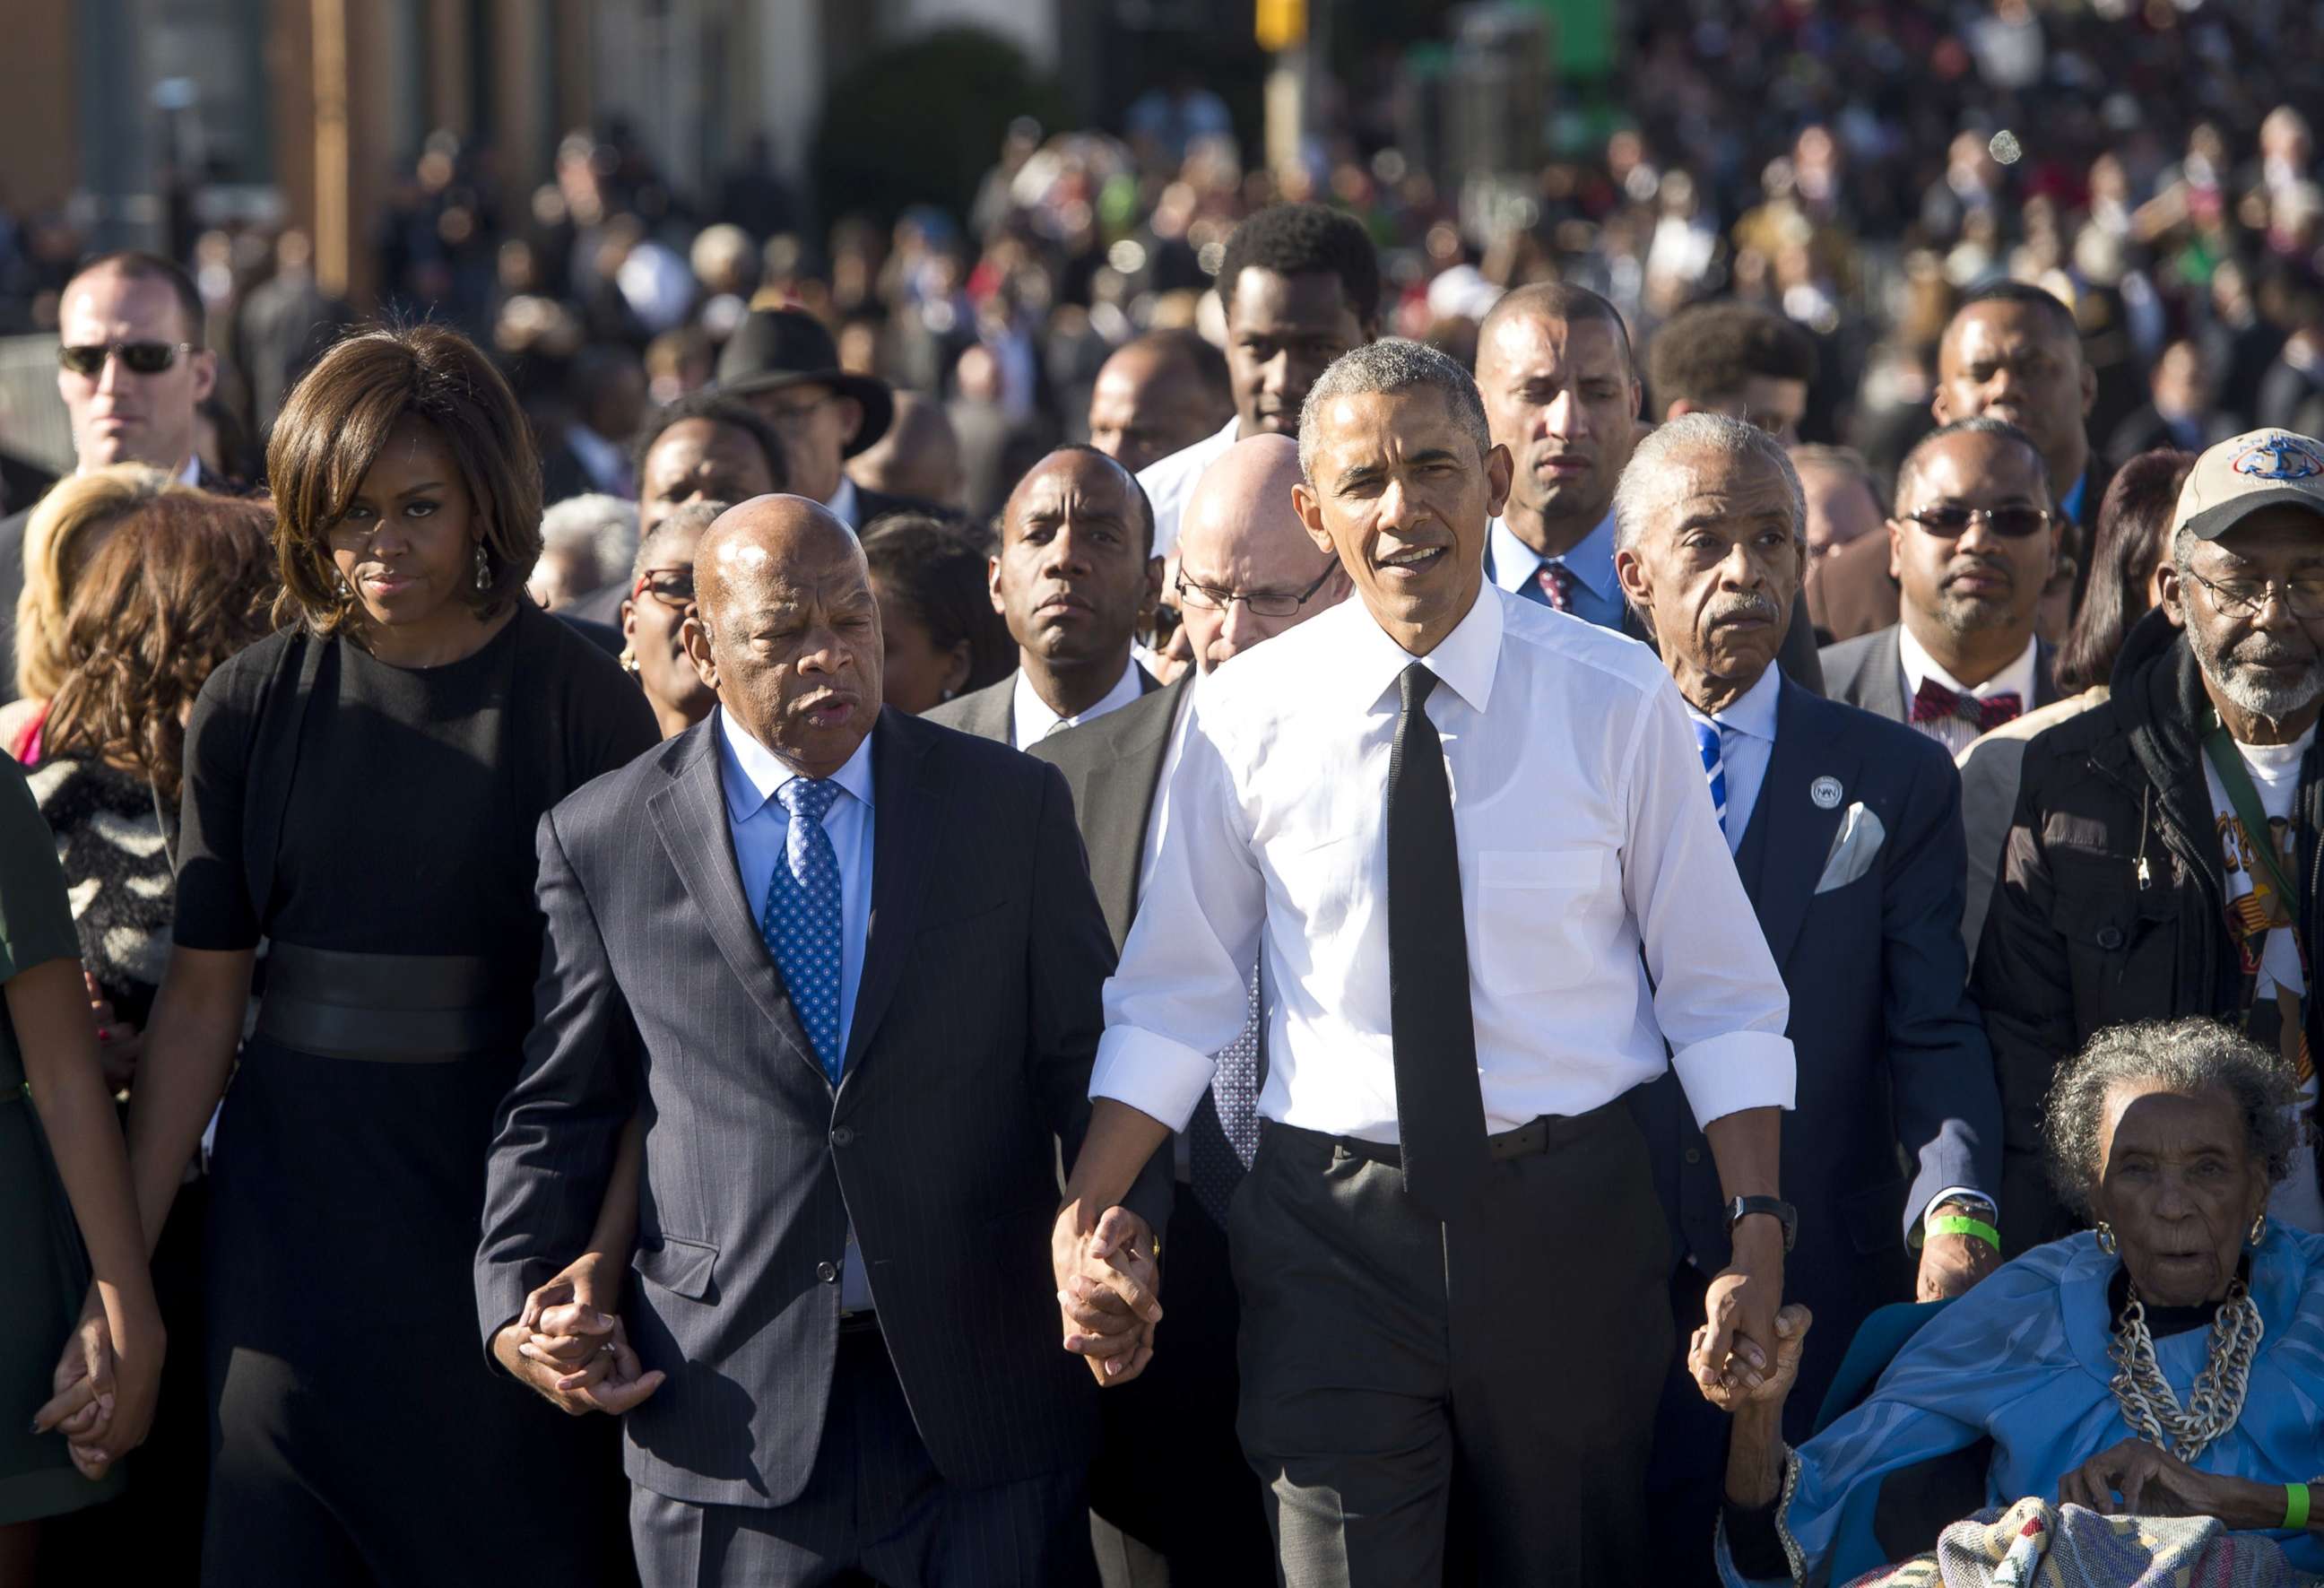 PHOTO: President Barack Obama walks alongside Rep. John Lewis, one of the original marchers, across the Edmund Pettus Bridge to mark the 50th Anniversary of the Selma to Montgomery civil rights marches in Selma, Ala., March 7, 2015. 